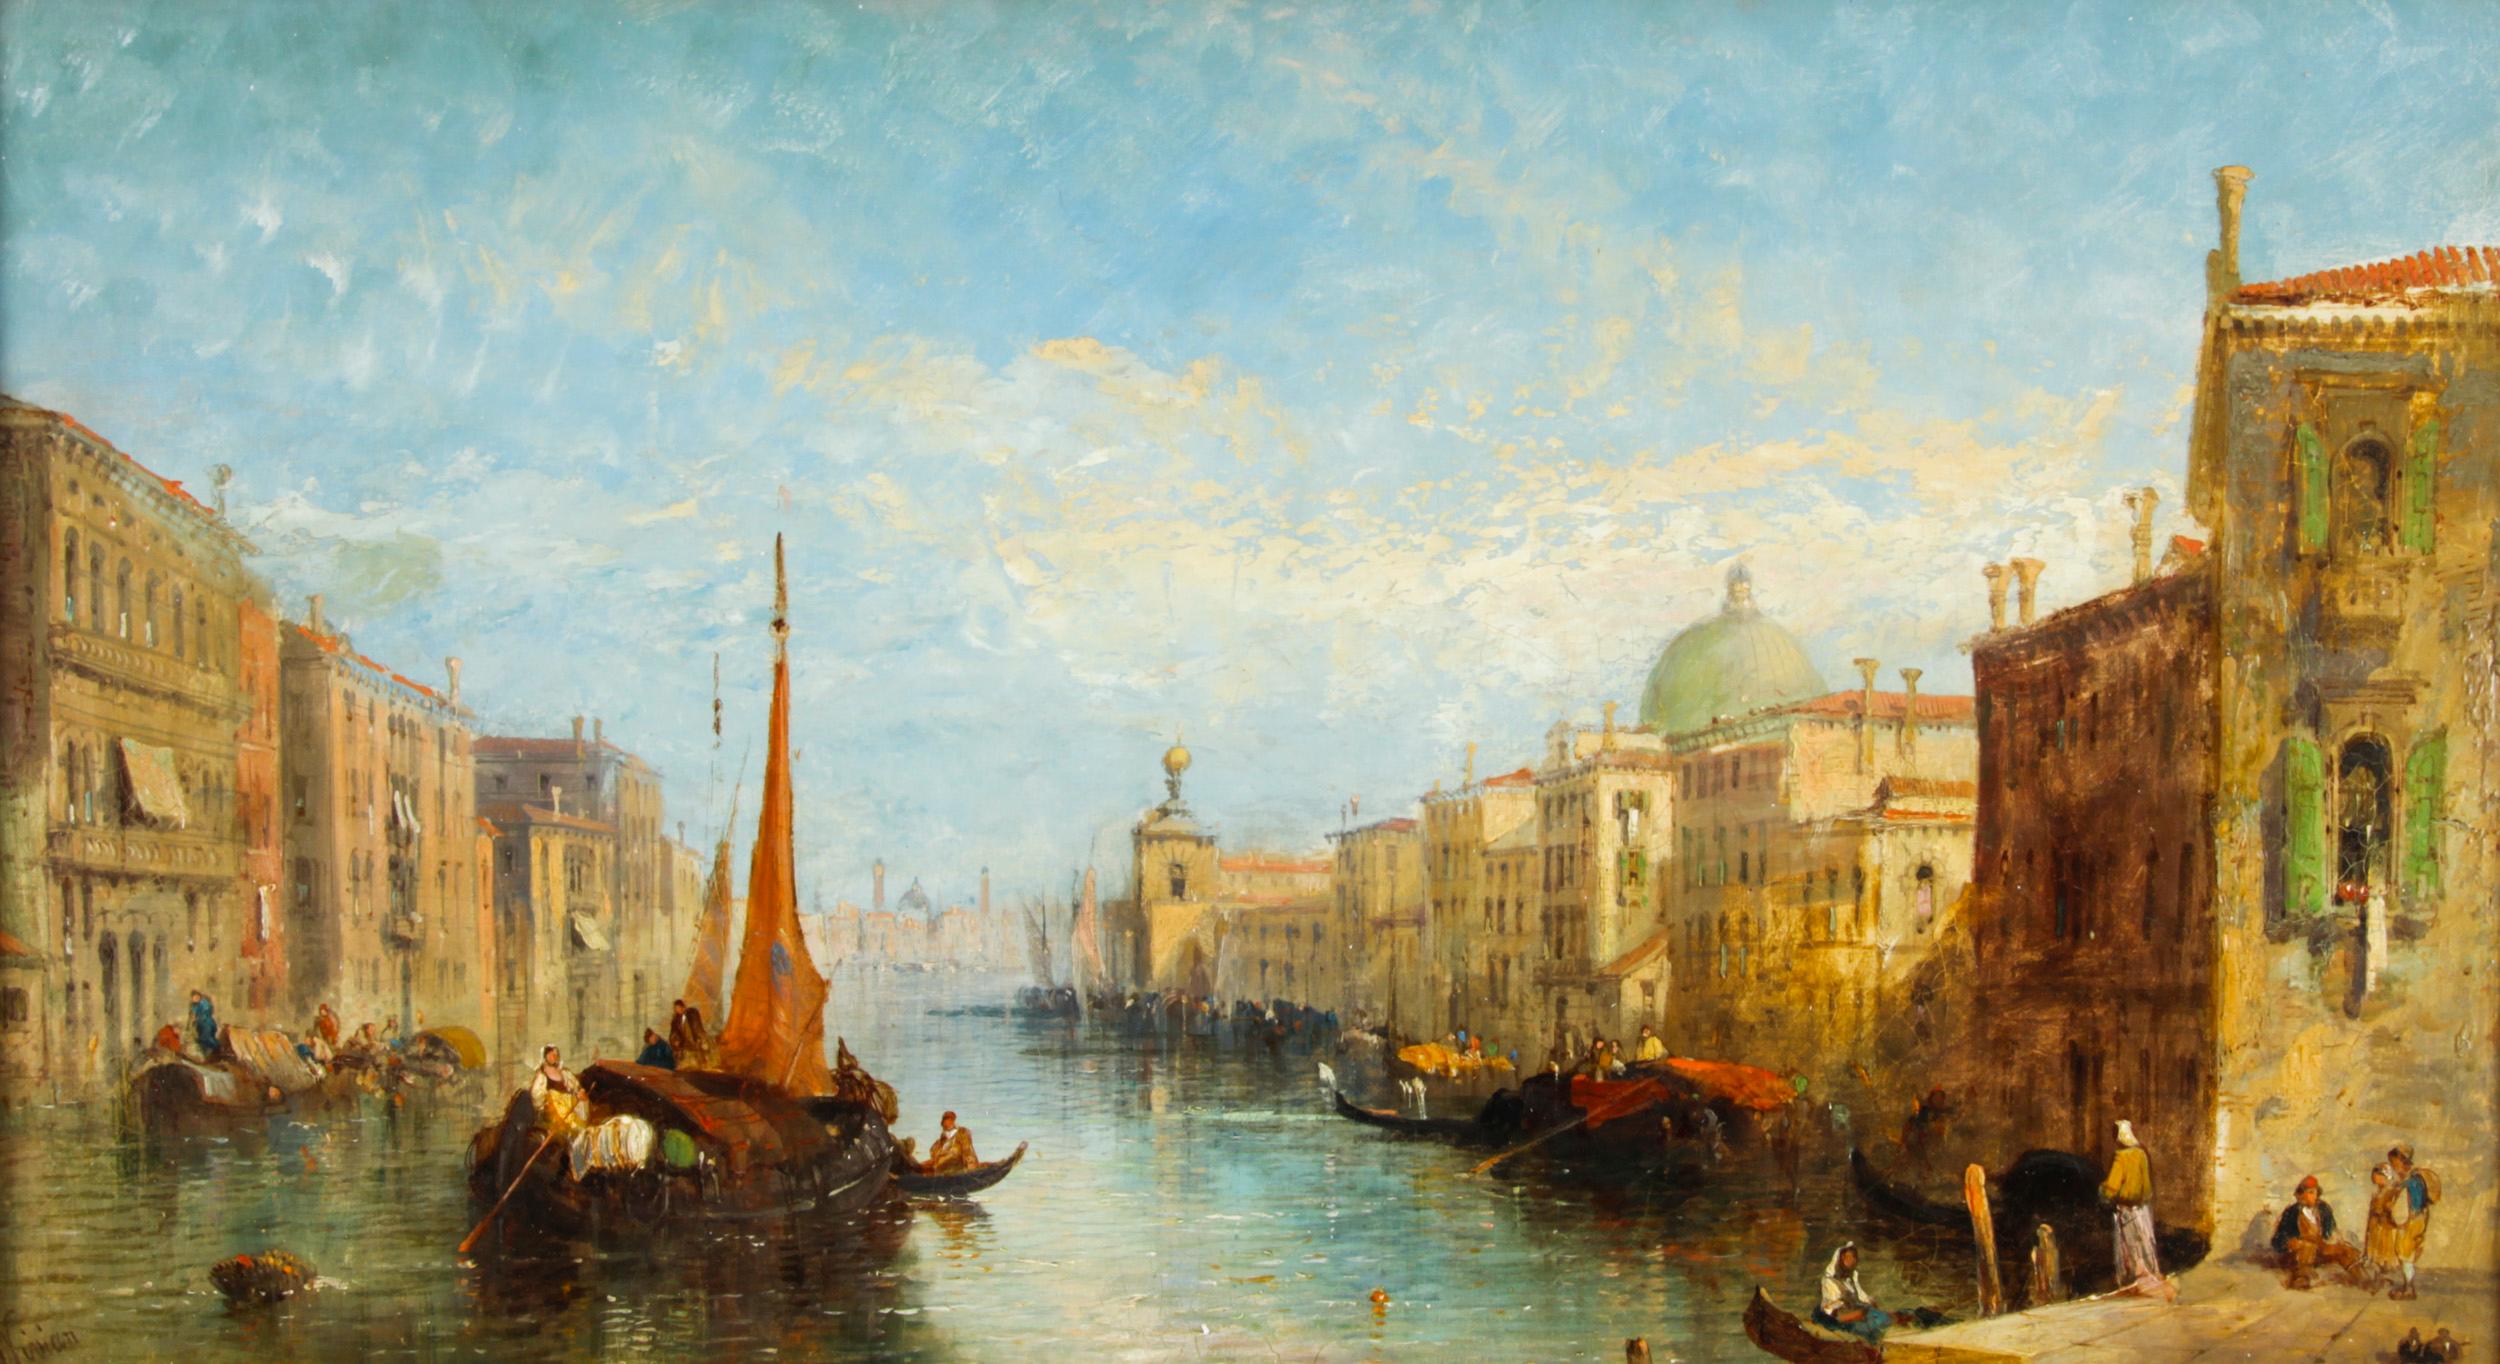 This beautiful oil on canvas painting by Jane Vivian (Active 1869-1890) beautifully captures a stunning Venetian Scene looking down The Grand Canal.

This beautiful landscape captures a striking view of the banks of the Grand Canal, it features a